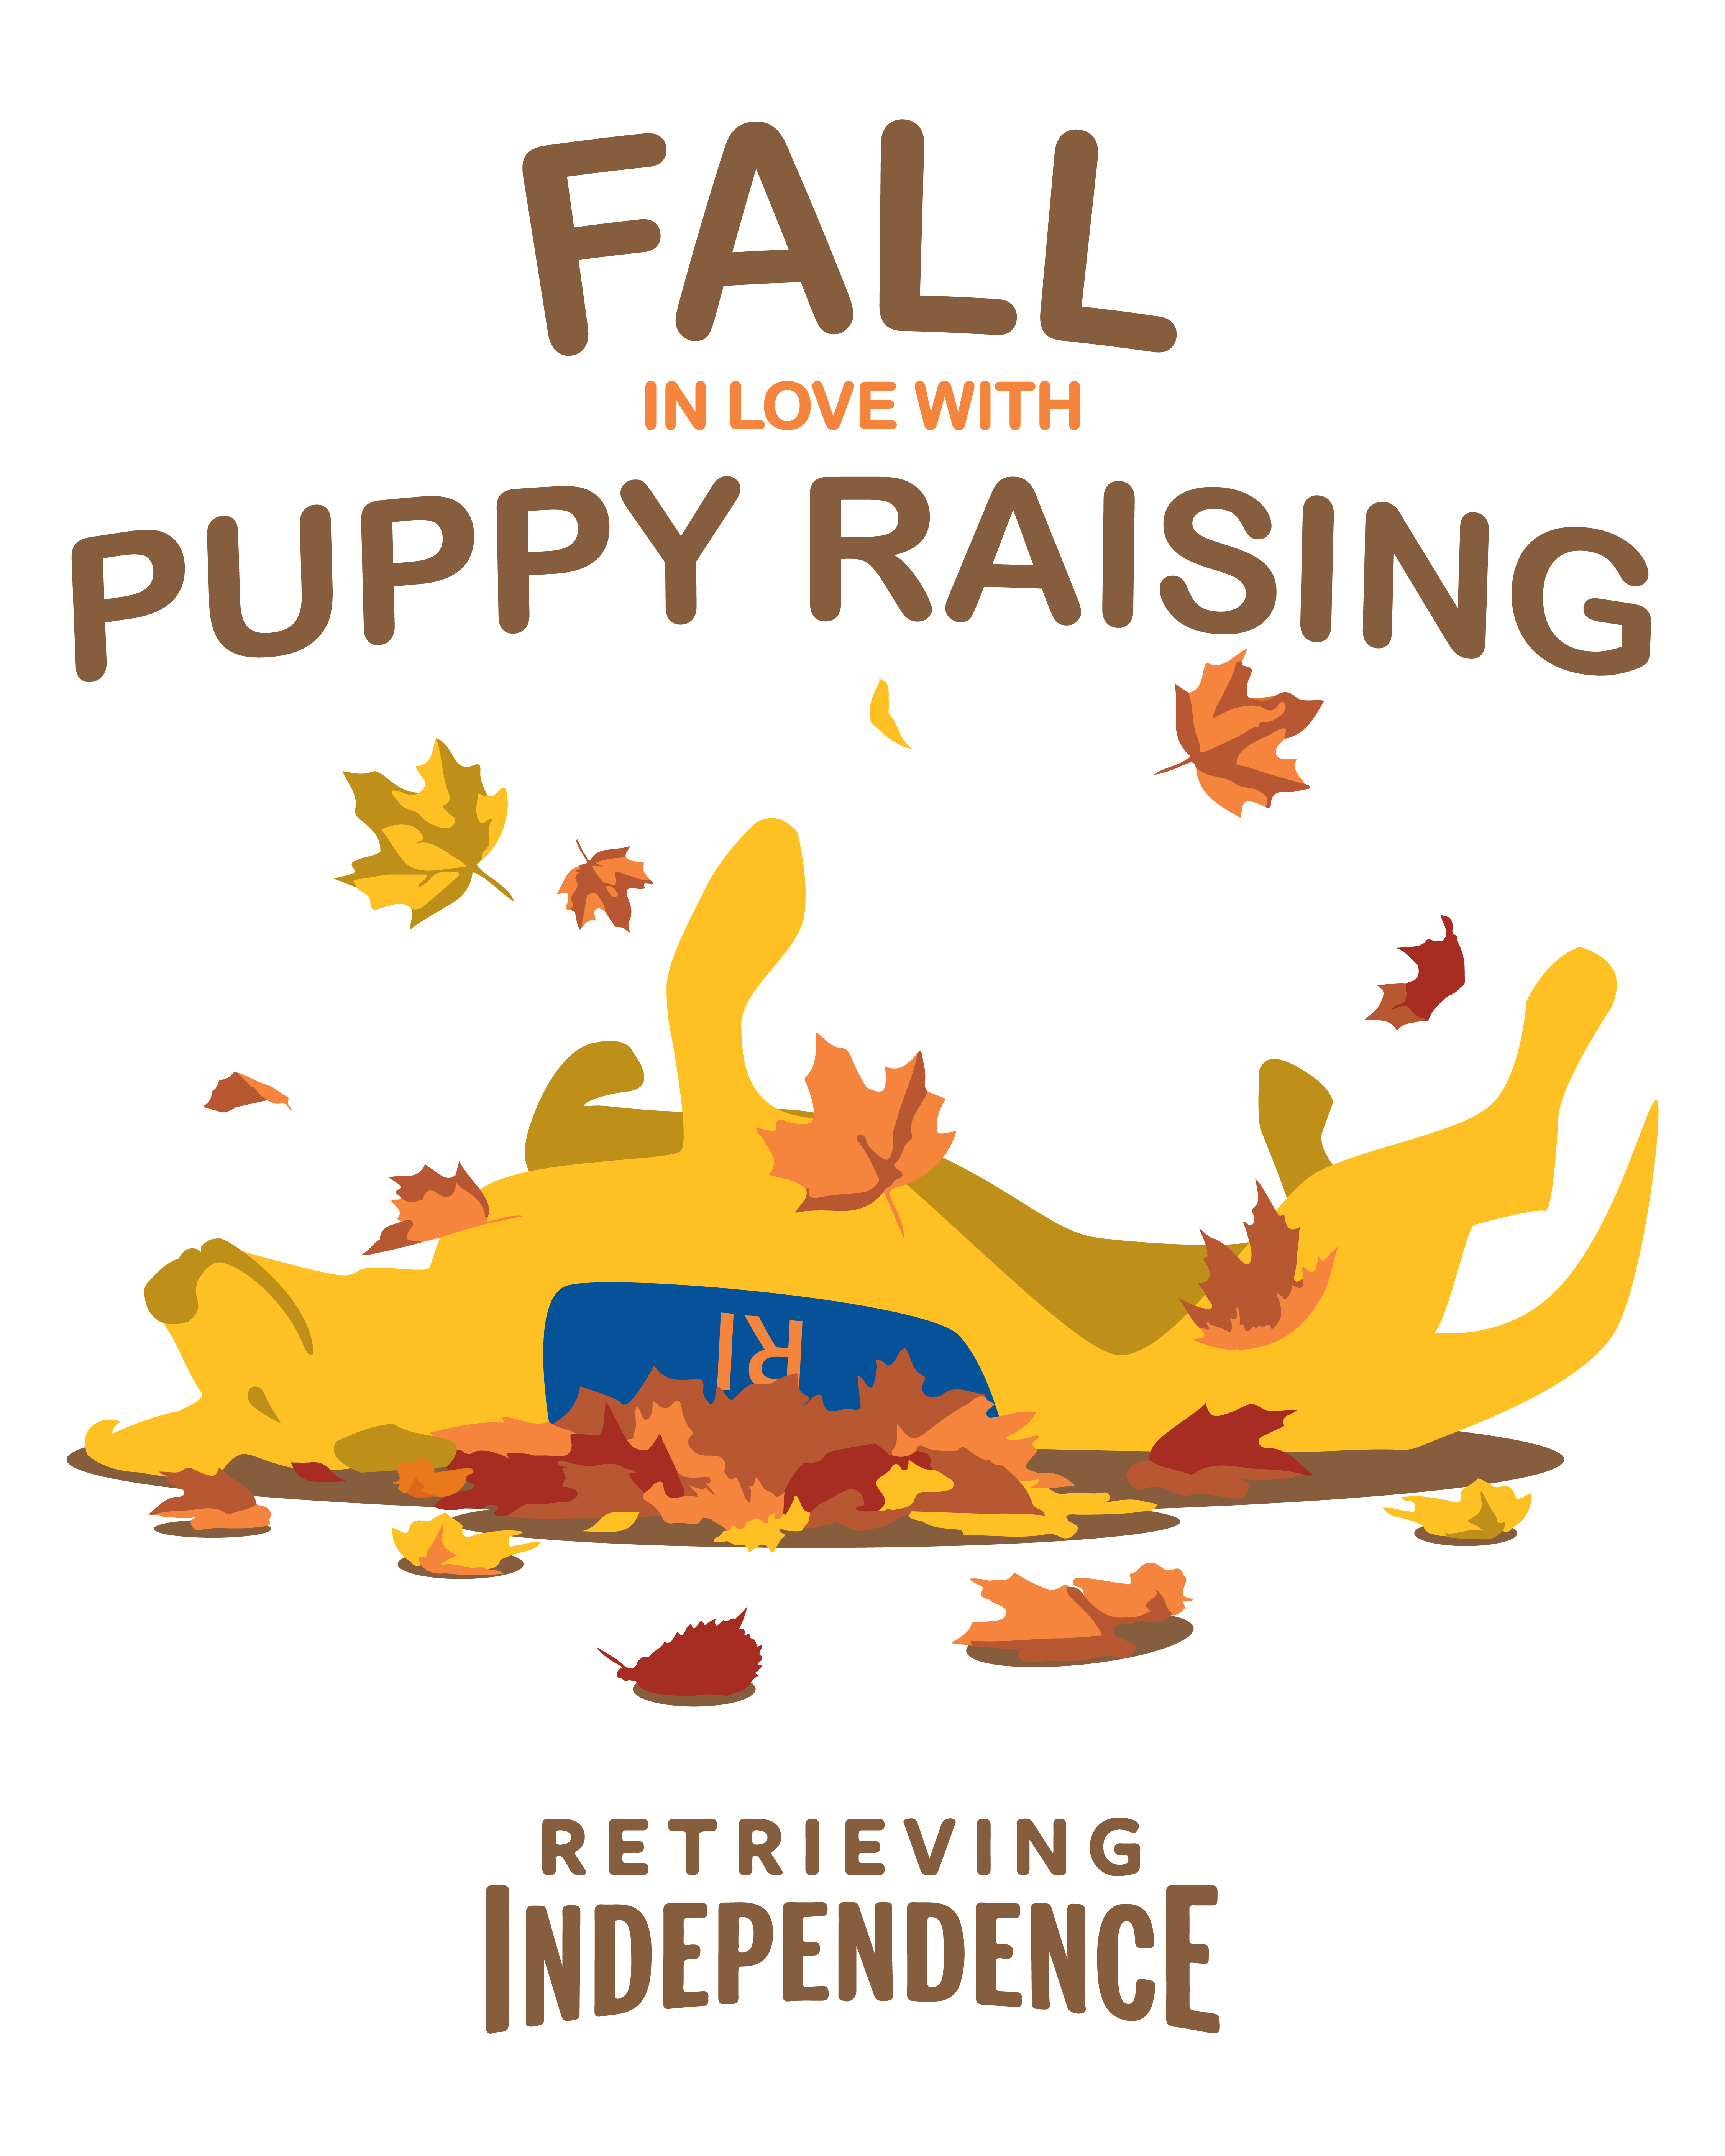 New Puppy Raising T-shirt: Fall in Love with Puppy Raising!